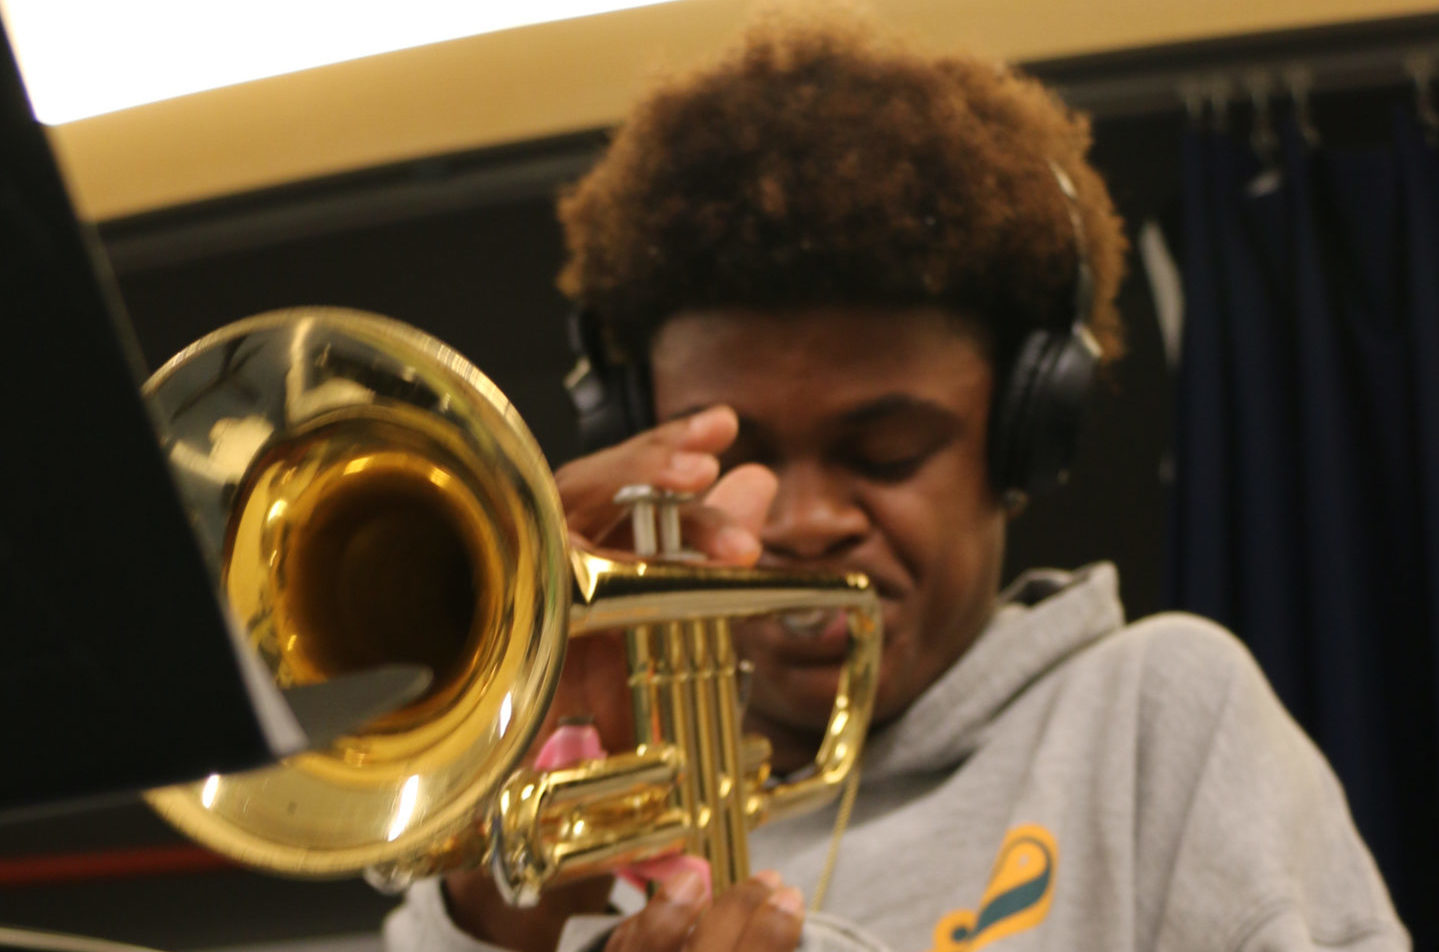 Student playing a trumpet.